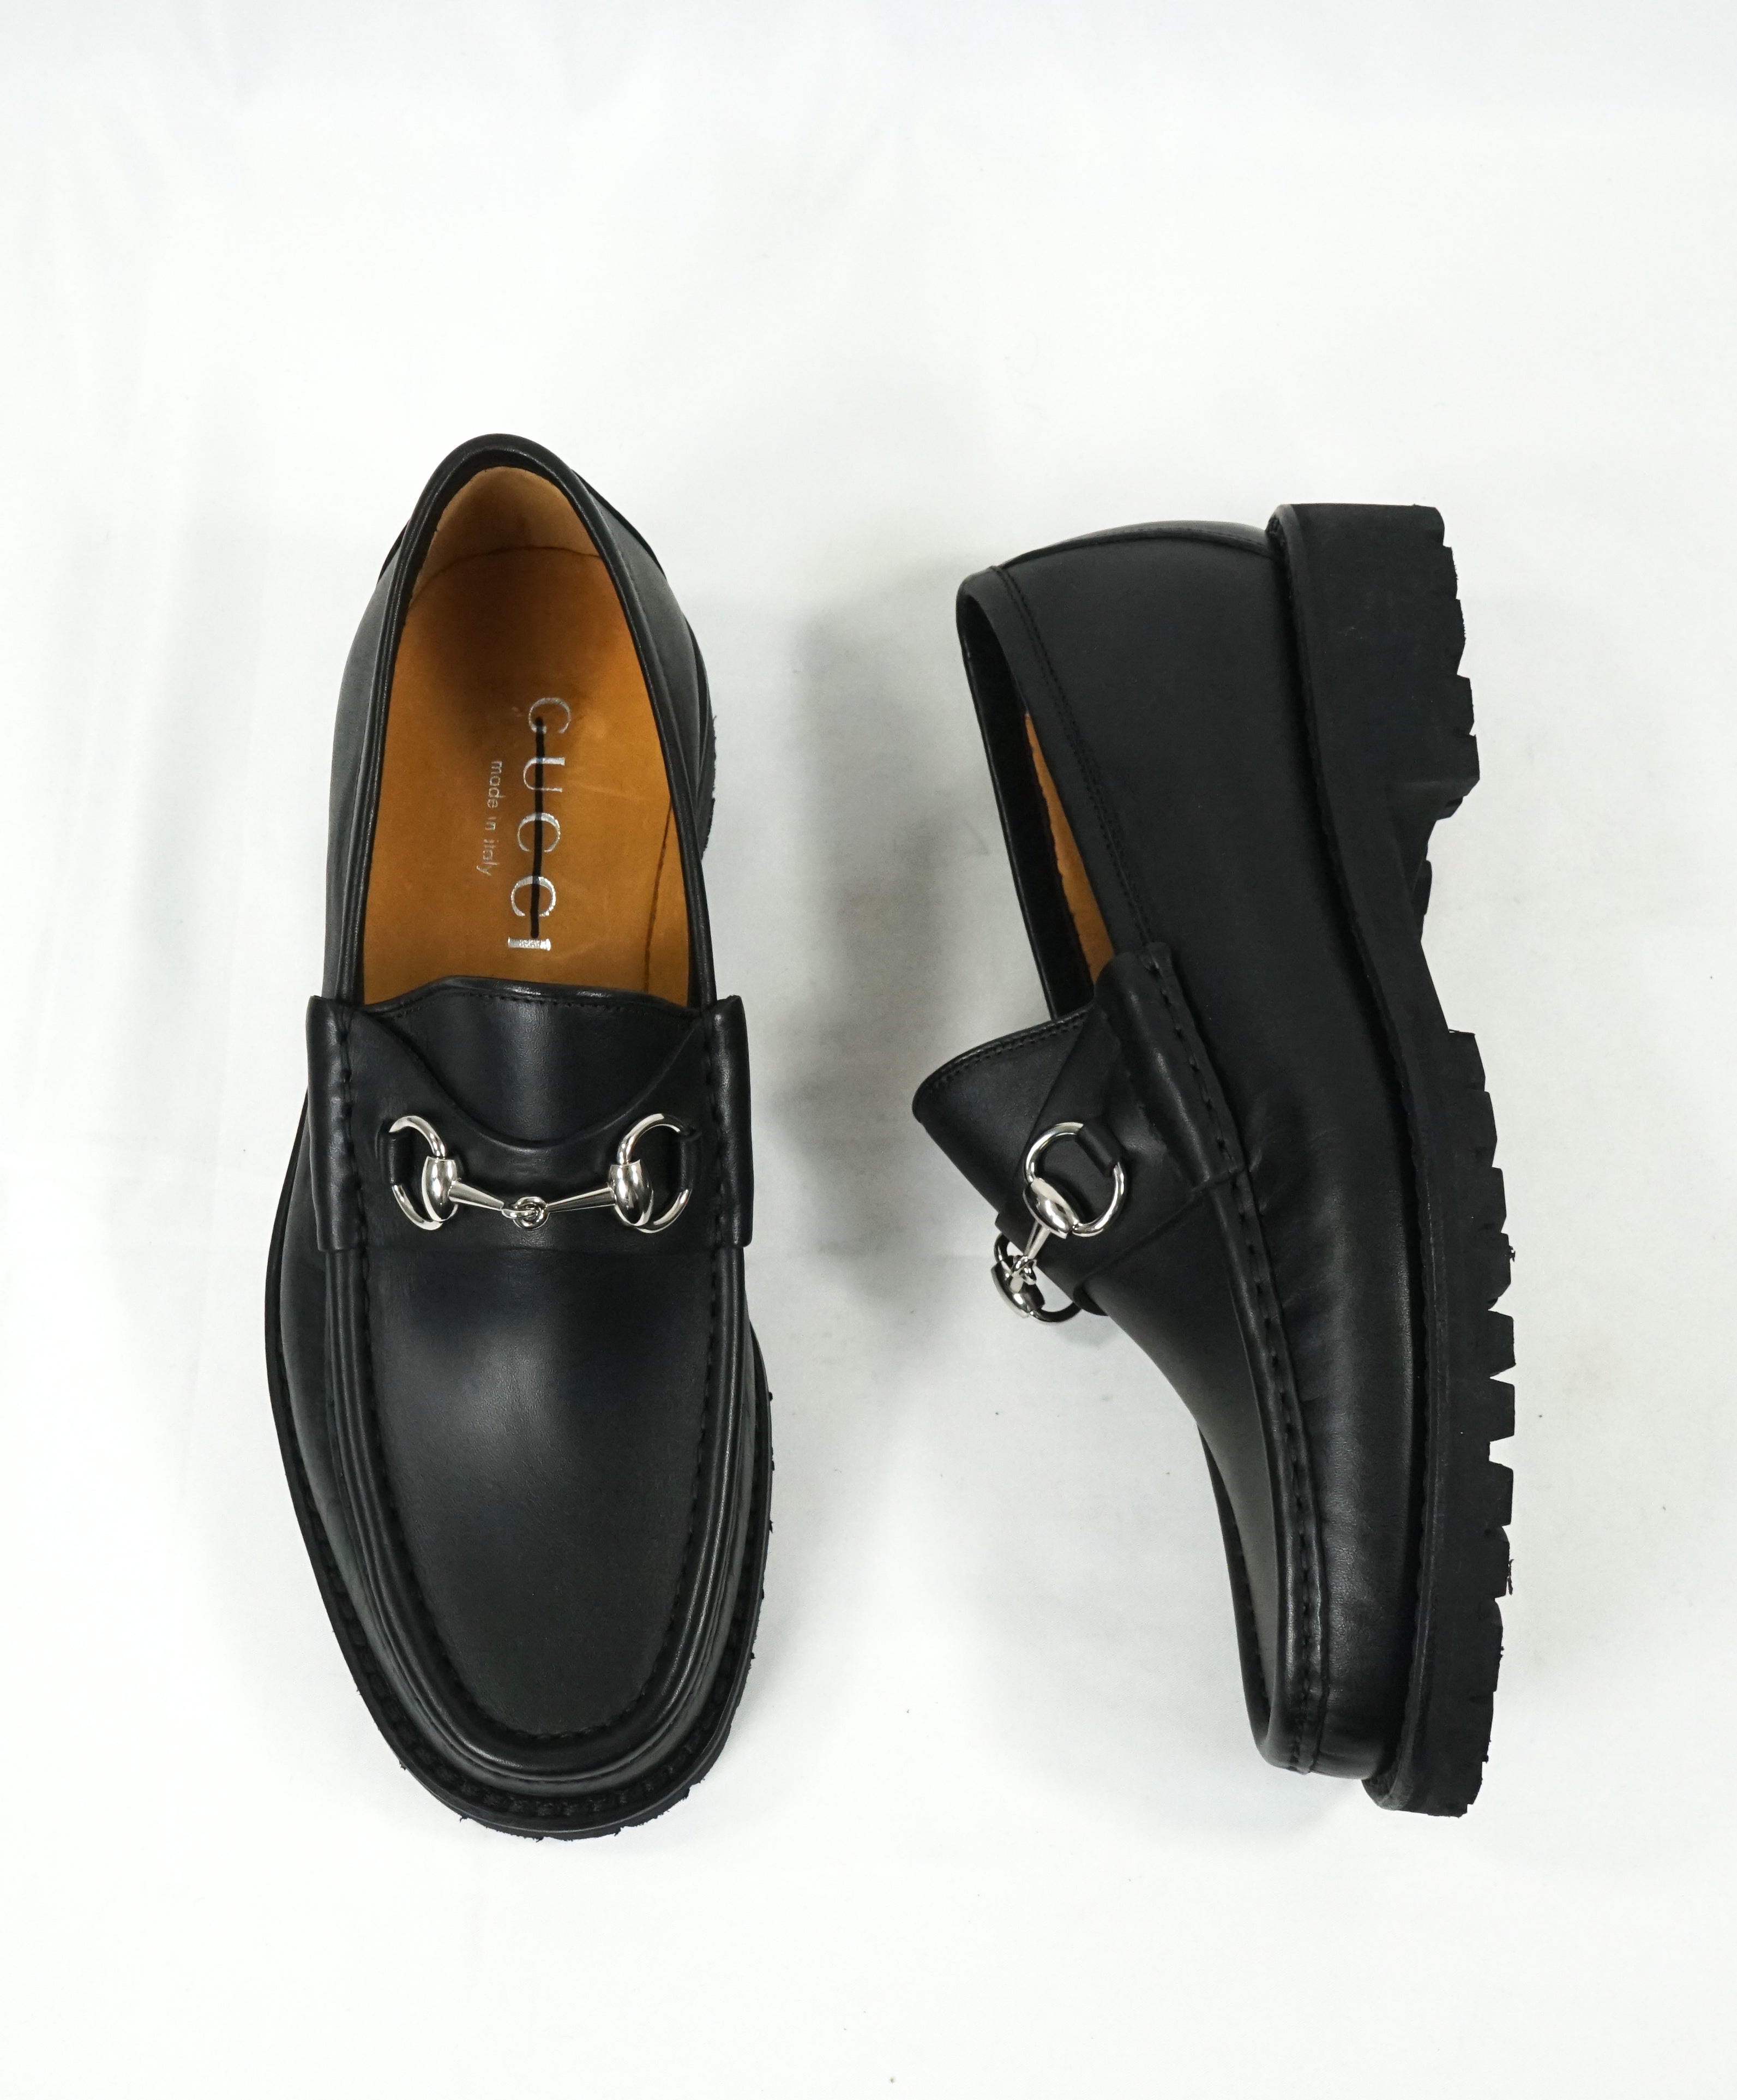 gucci lug sole loafer brown, OFF 77 